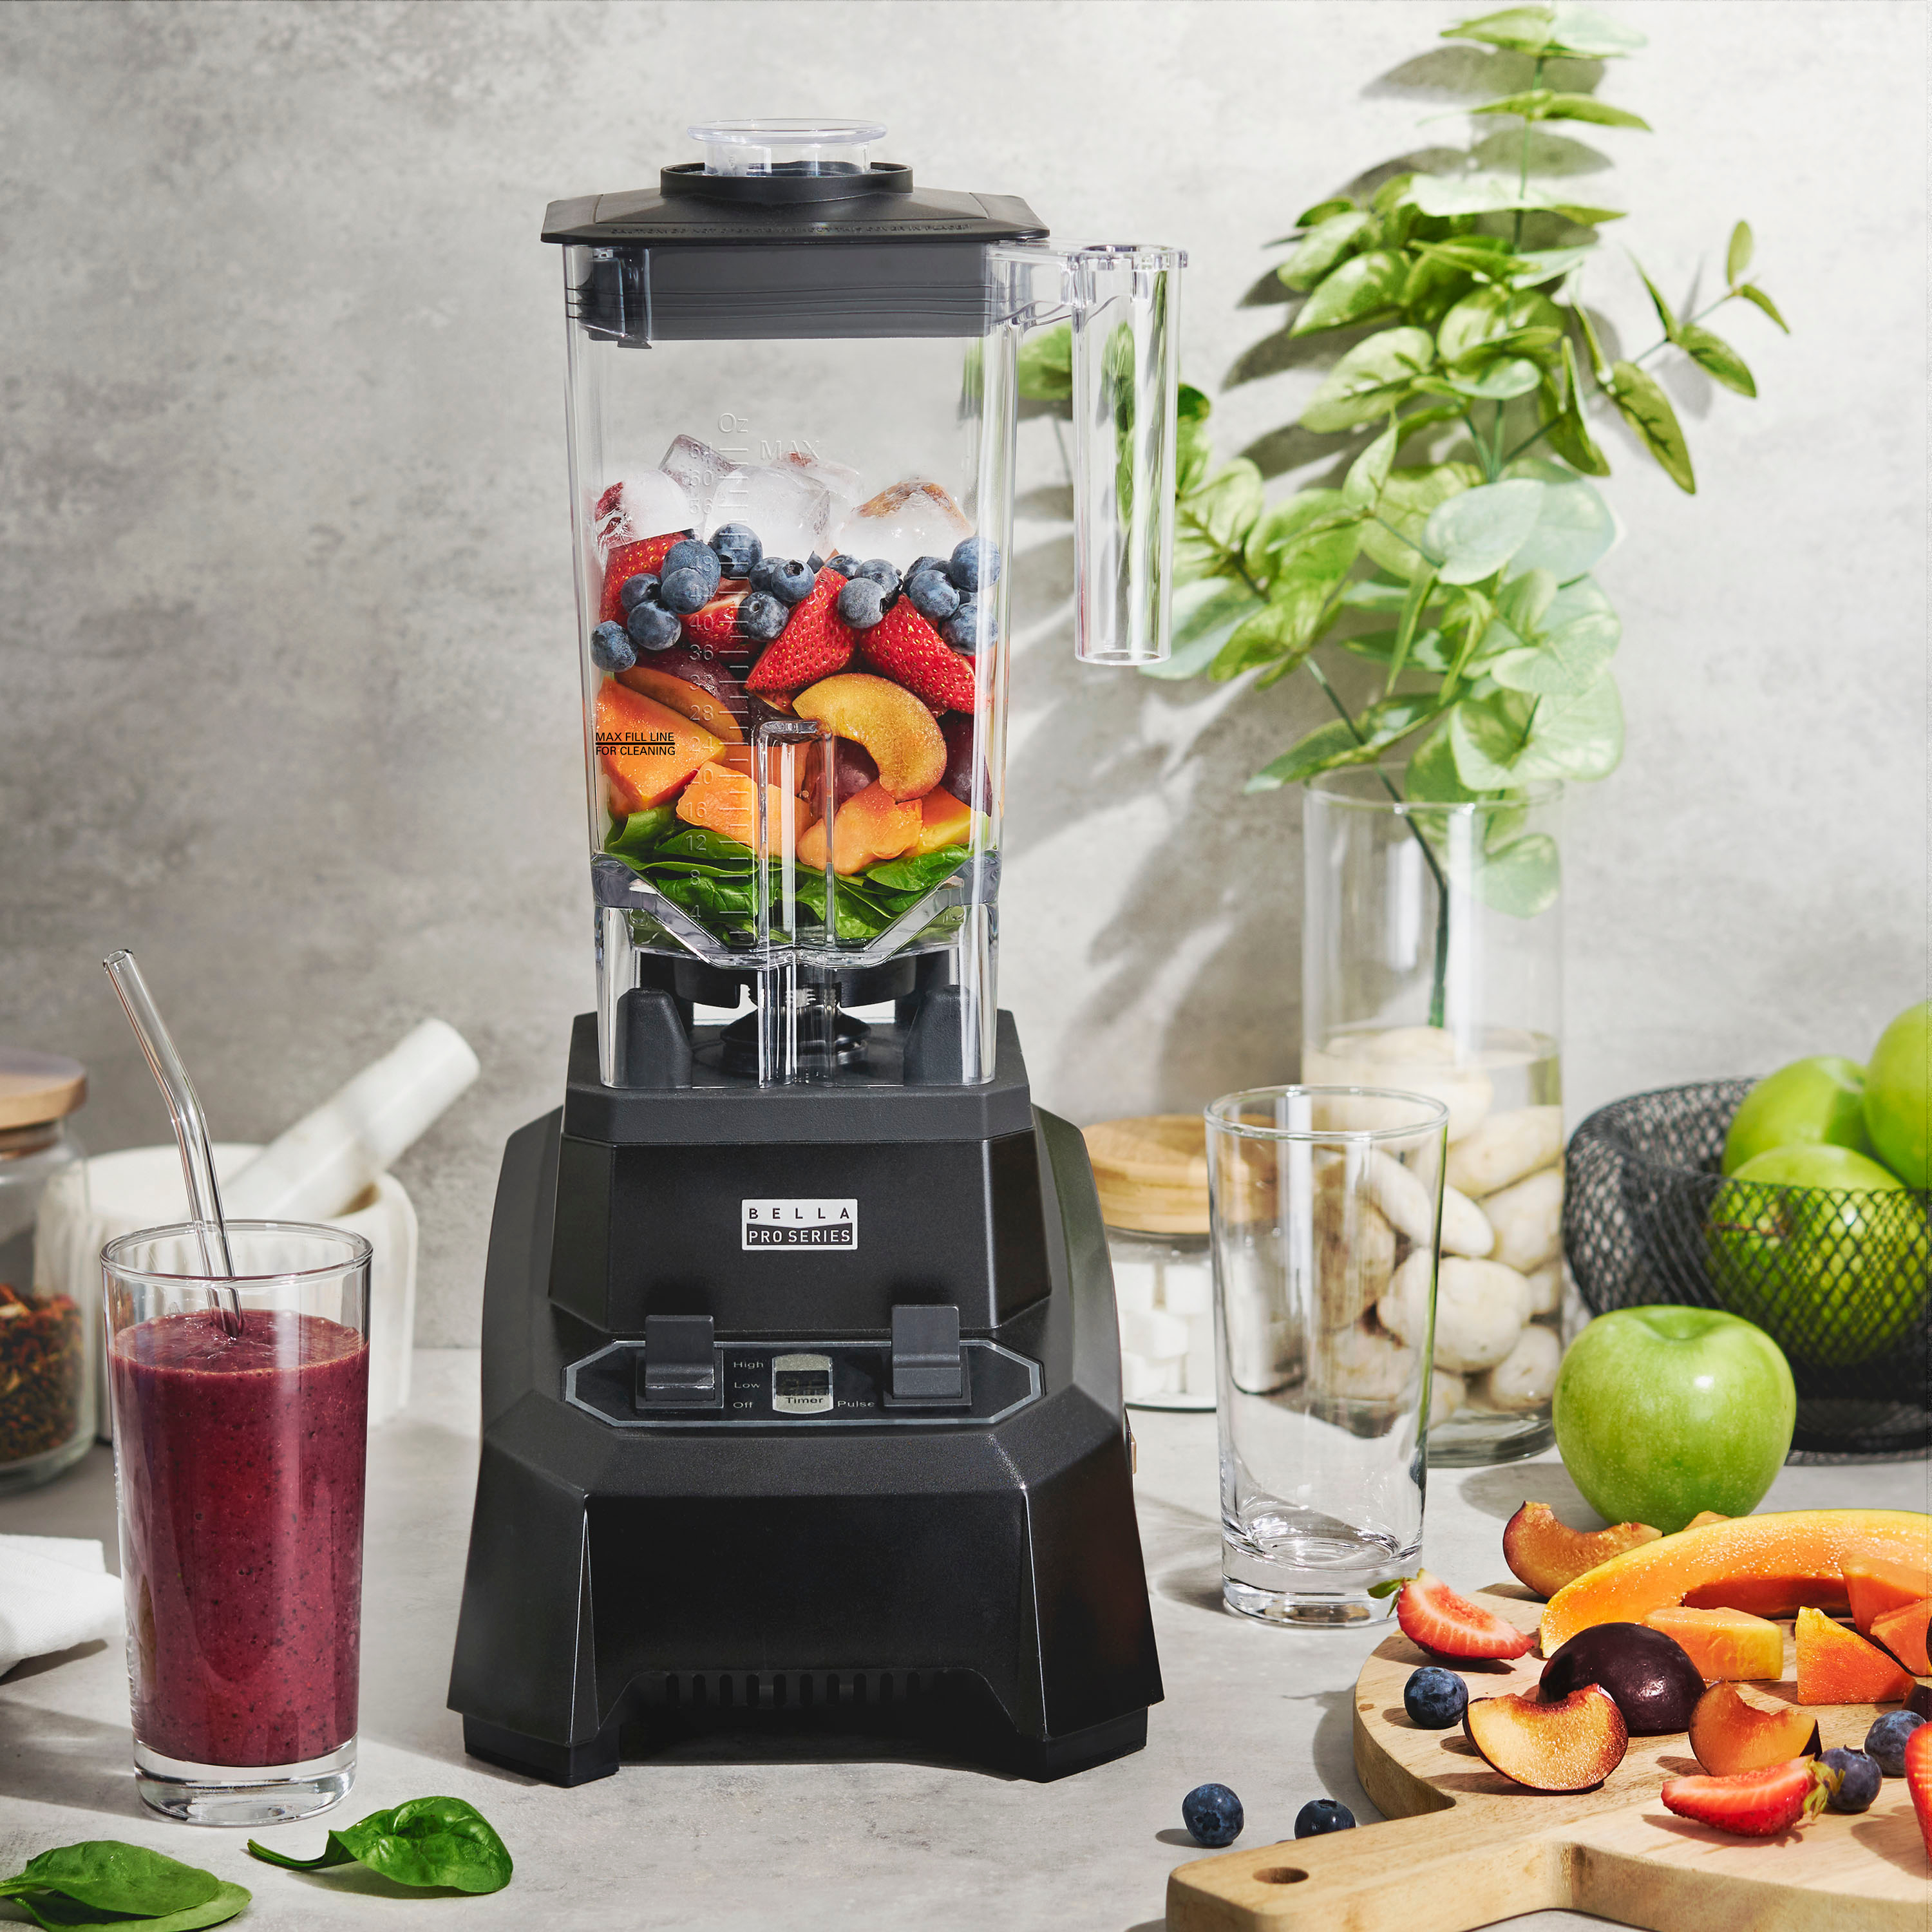 Bella Pro Series 7-Speed 90068 Blender Review - Consumer Reports